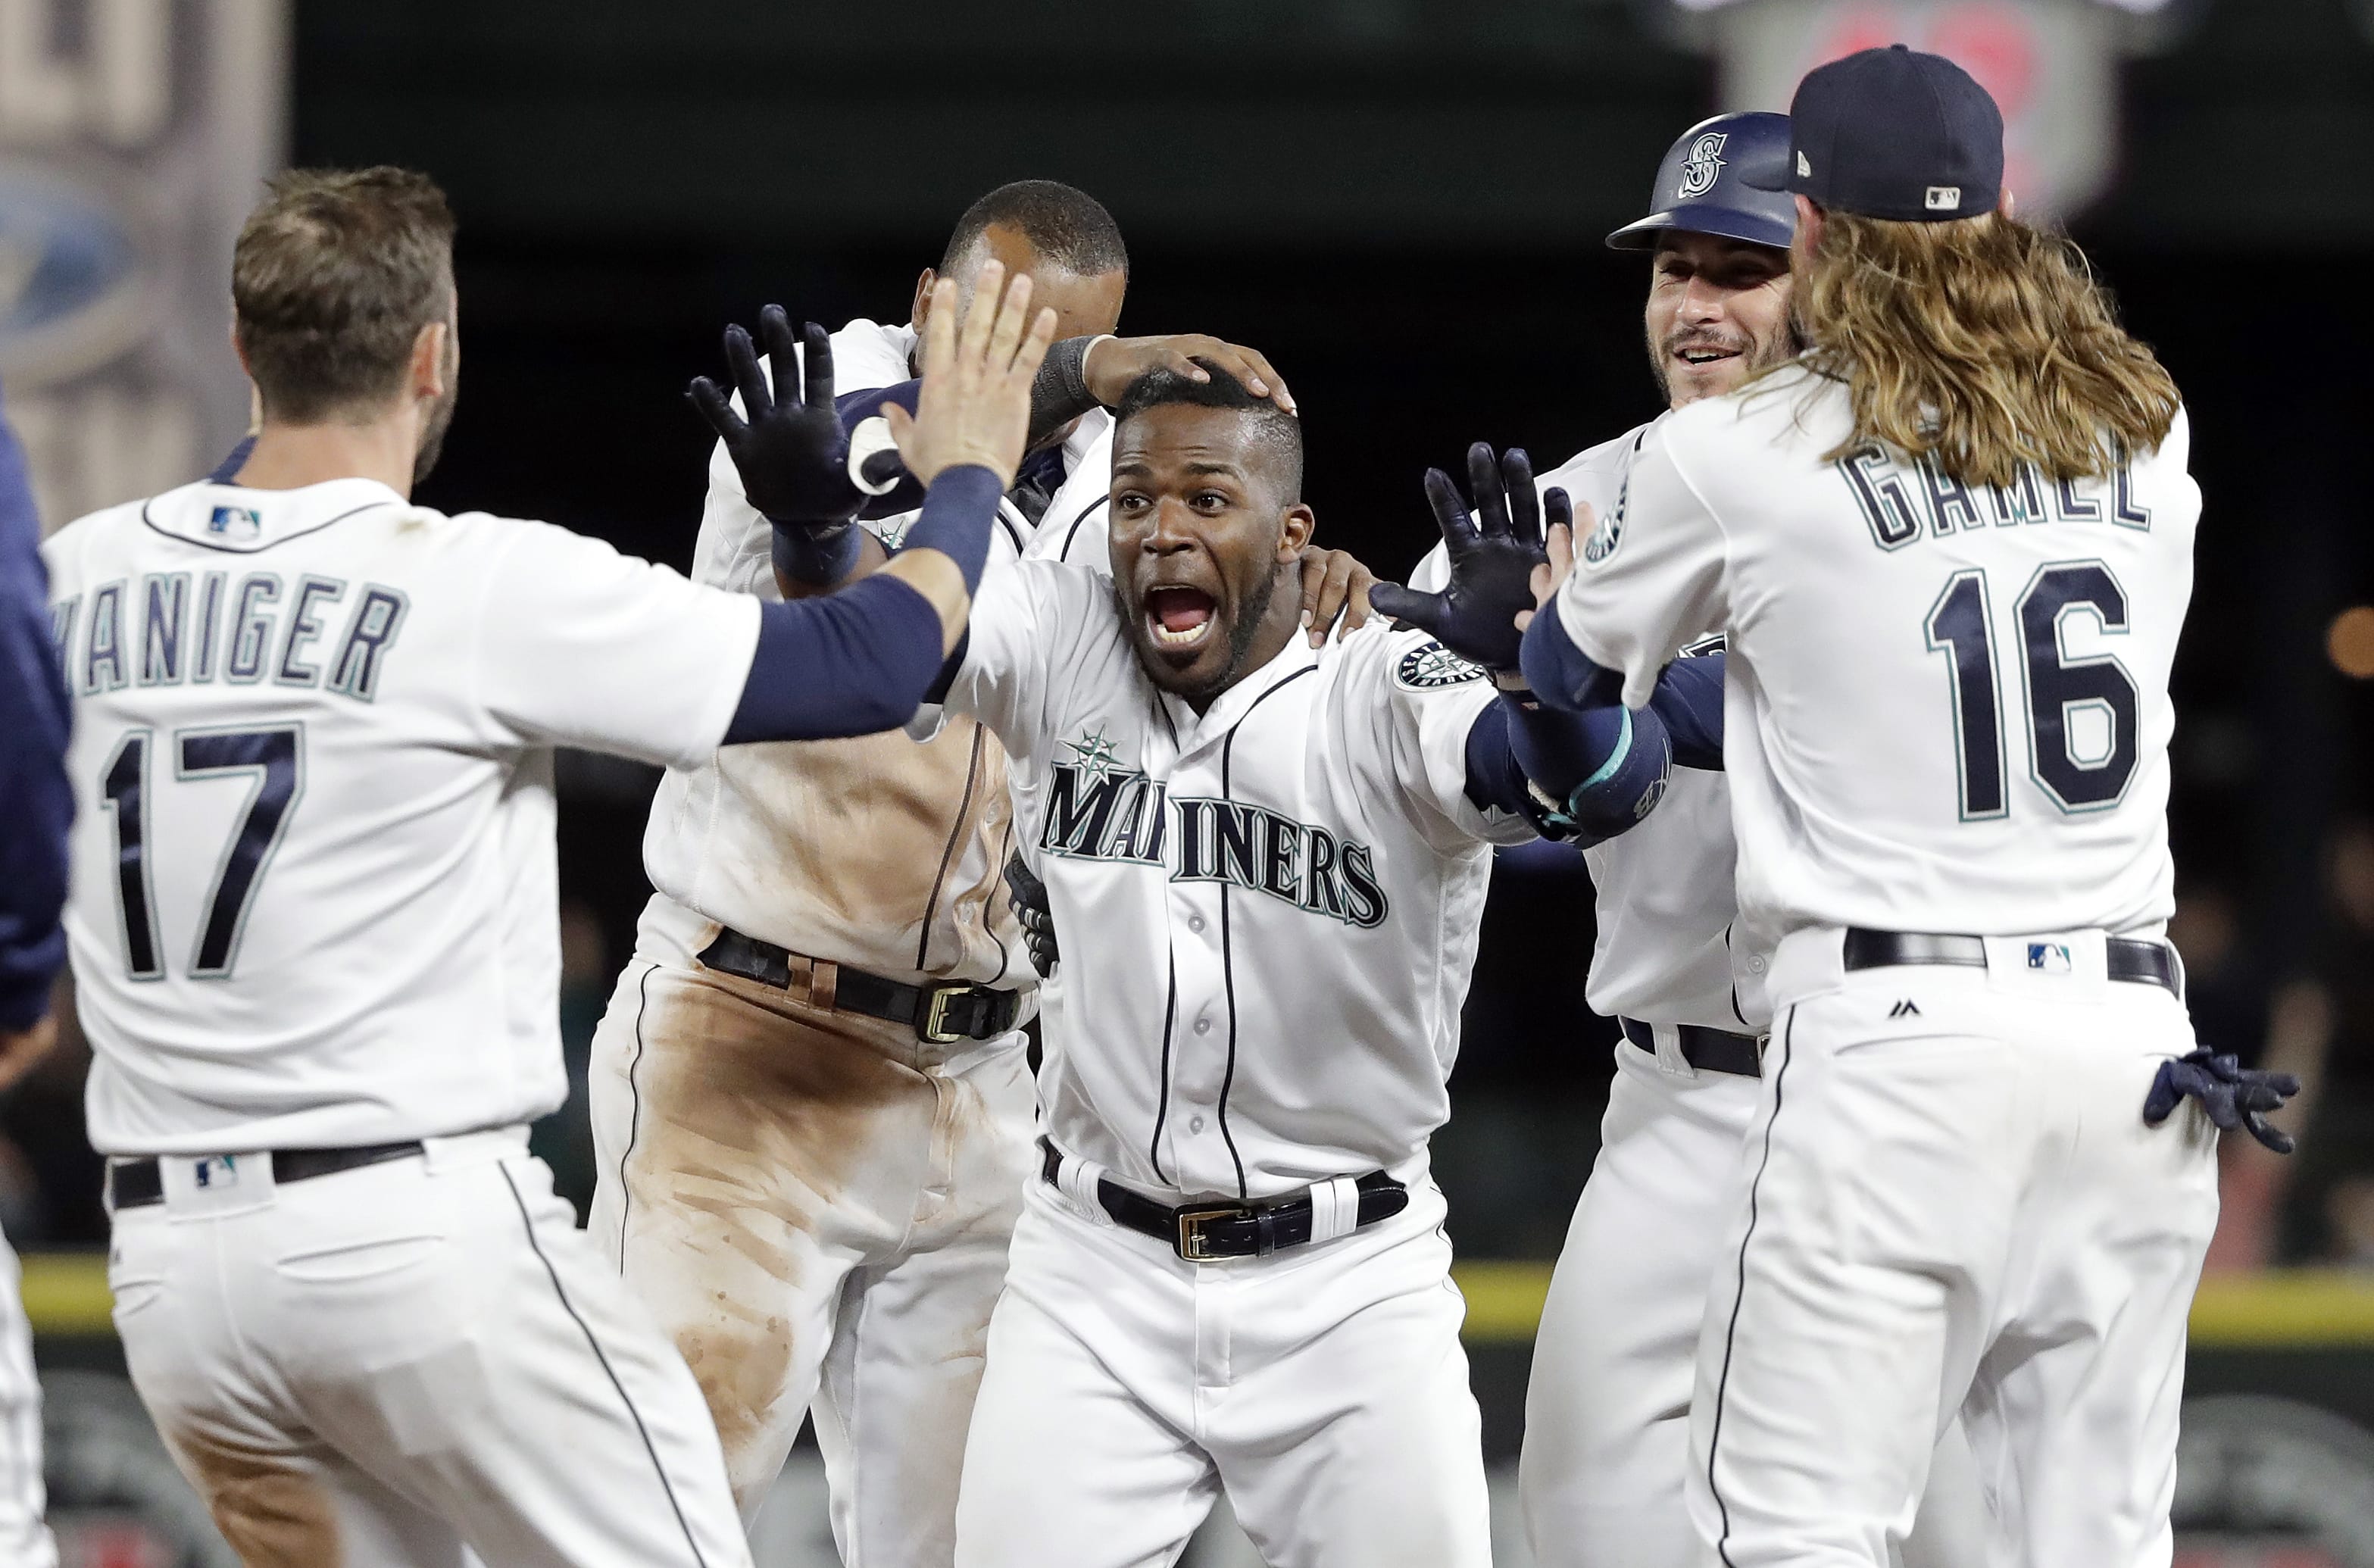 Seattle Mariners' Guillermo Heredia, center, is cheered by teammates after hitting a one-run single to beat the Texas Rangers in the 11th inning of a baseball game Tuesday, May 15, 2018, in Seattle. The Mariners won 9-8.